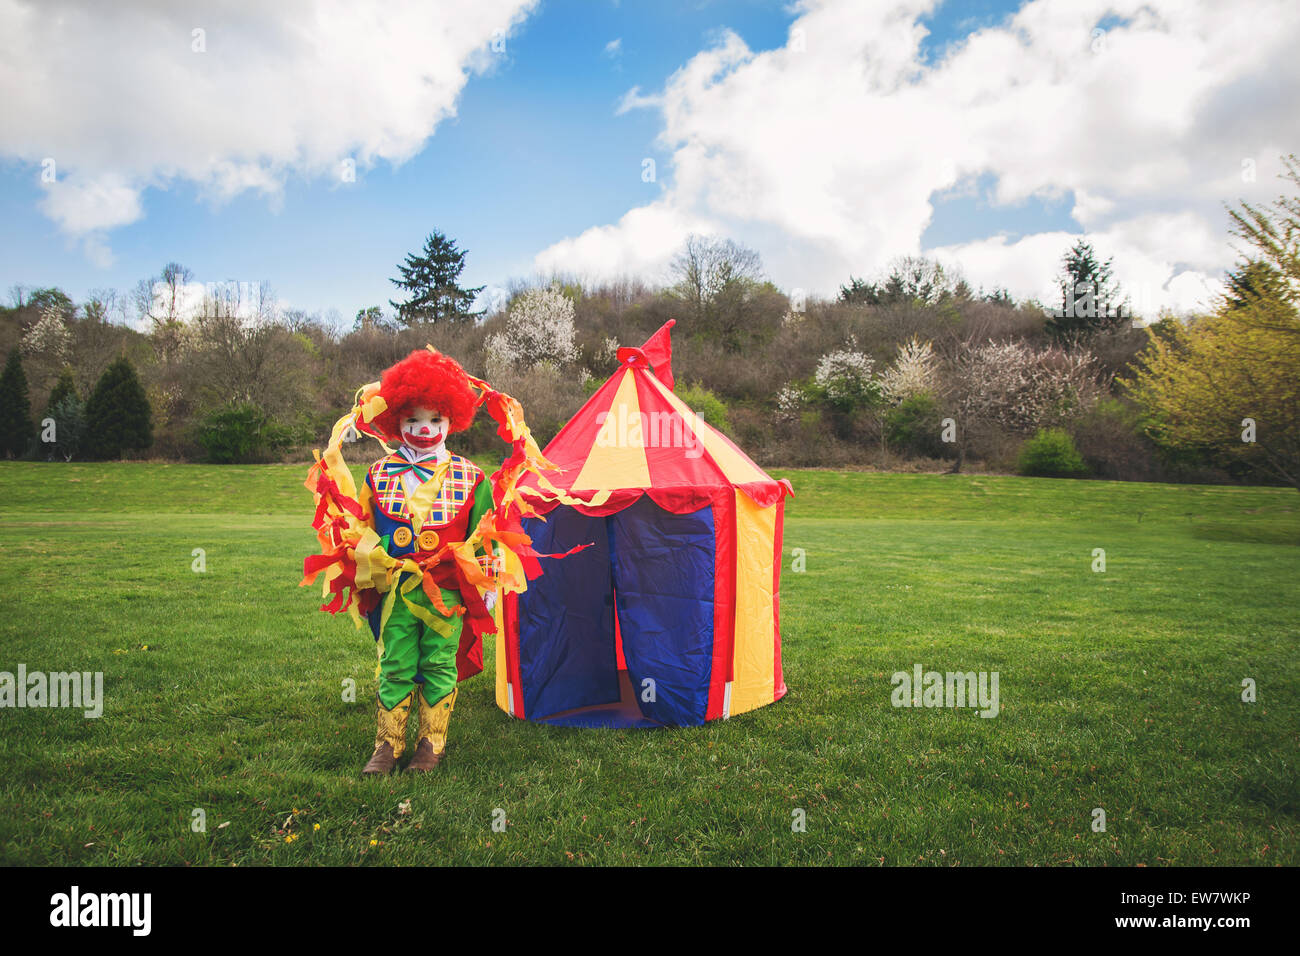 Boy dressed as a clown standing in front of a toy circus tent Stock Photo